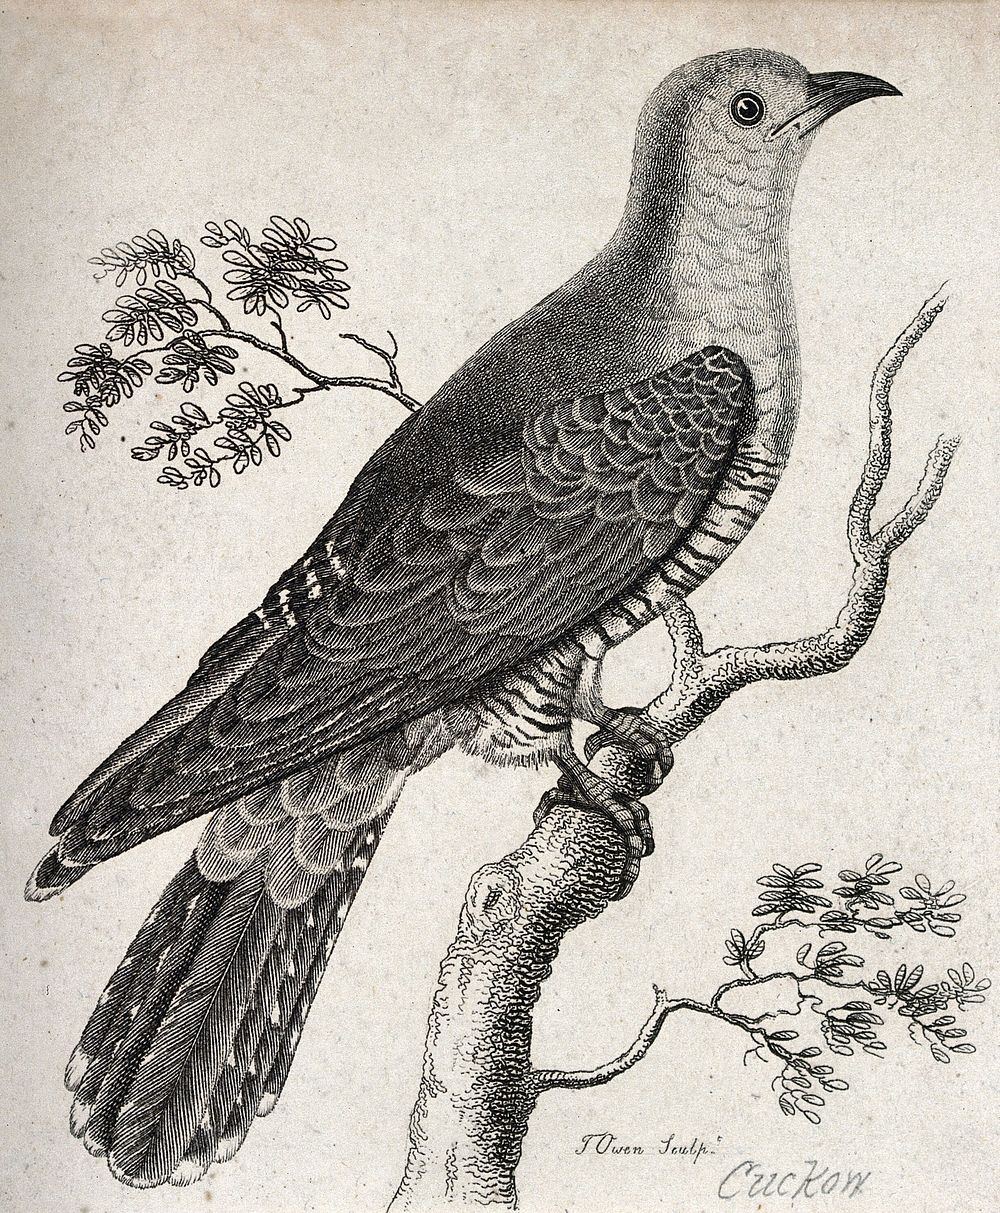 A cuckoo sitting on a branch of a tree. Etching by T. Owen.